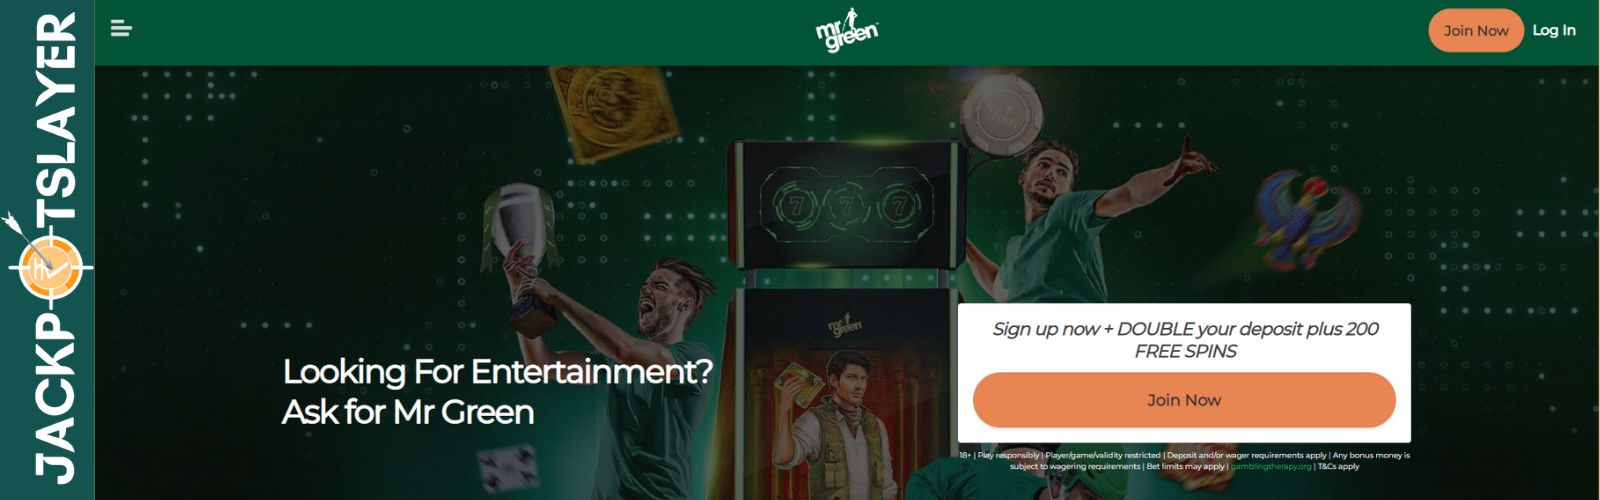 Mr.Green casino review